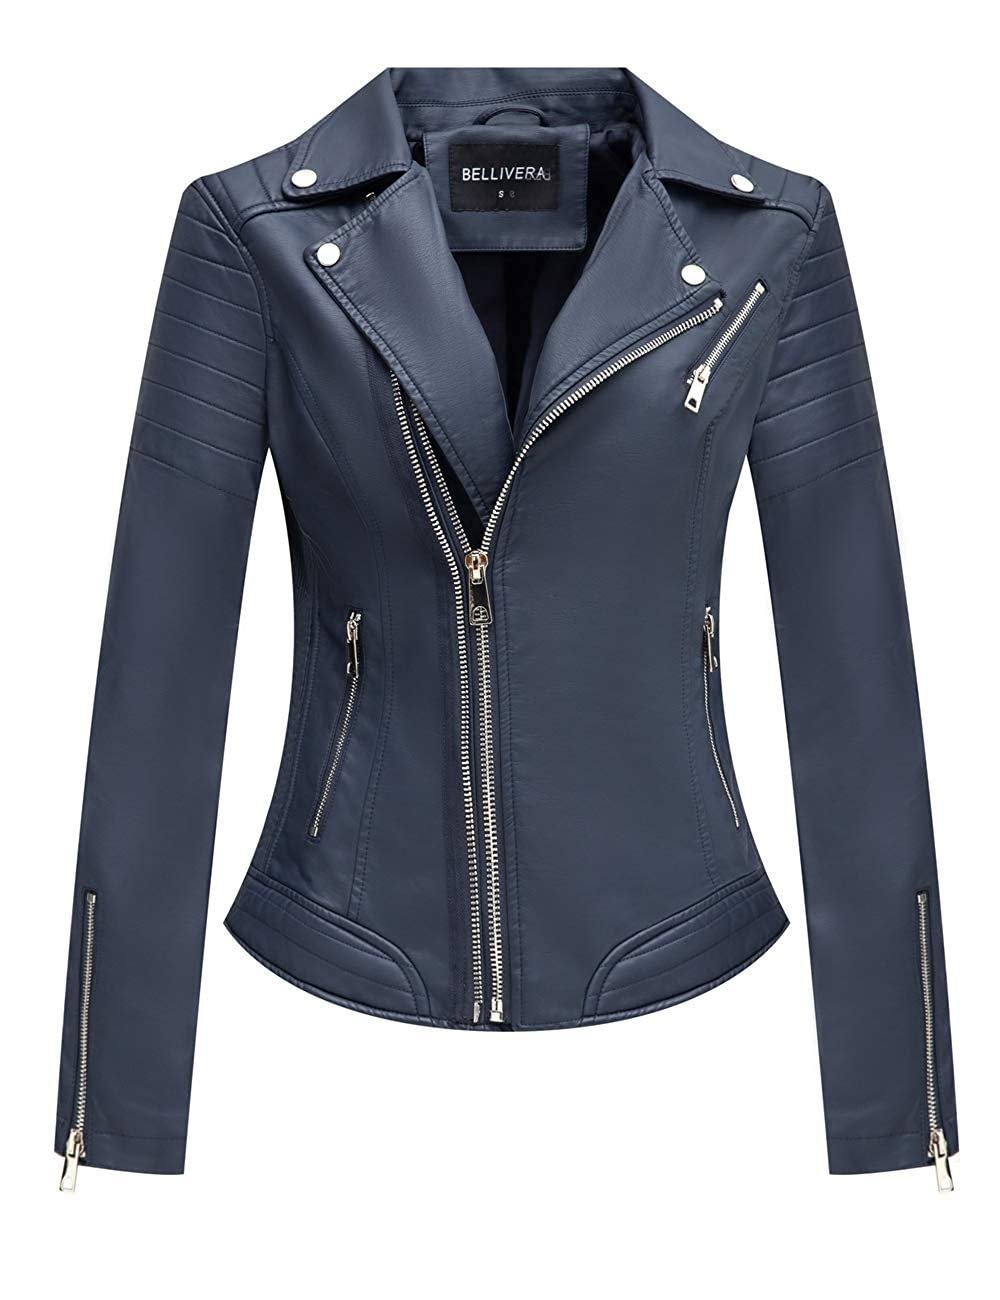 Women's Faux Leather Jacket，Moto Casual Short Coat for Spring and Fall